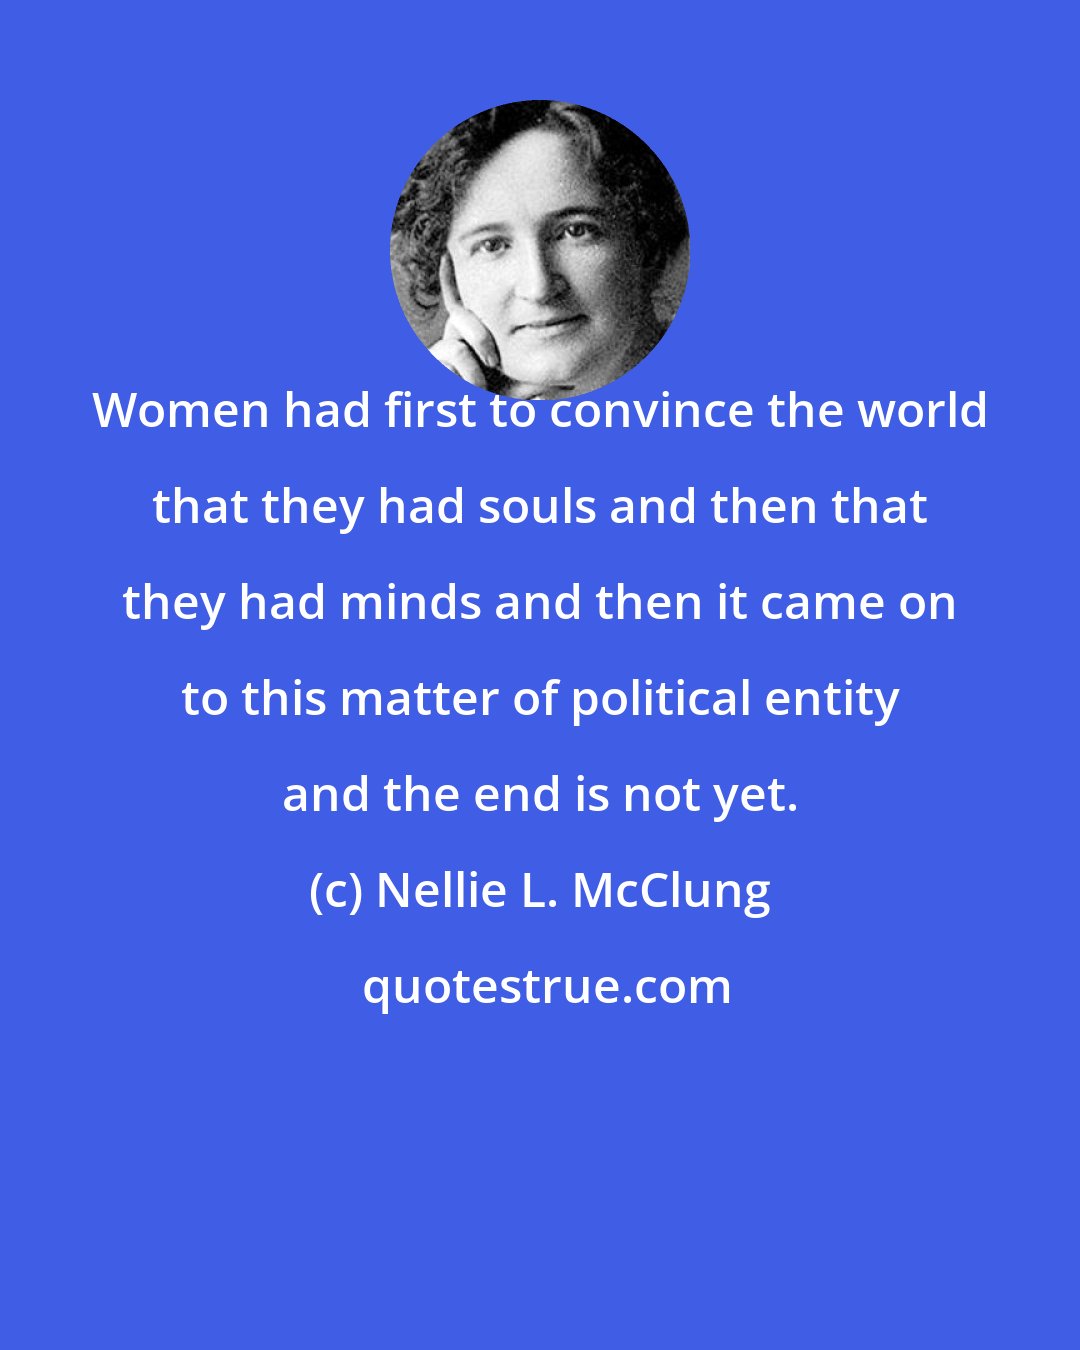 Nellie L. McClung: Women had first to convince the world that they had souls and then that they had minds and then it came on to this matter of political entity and the end is not yet.